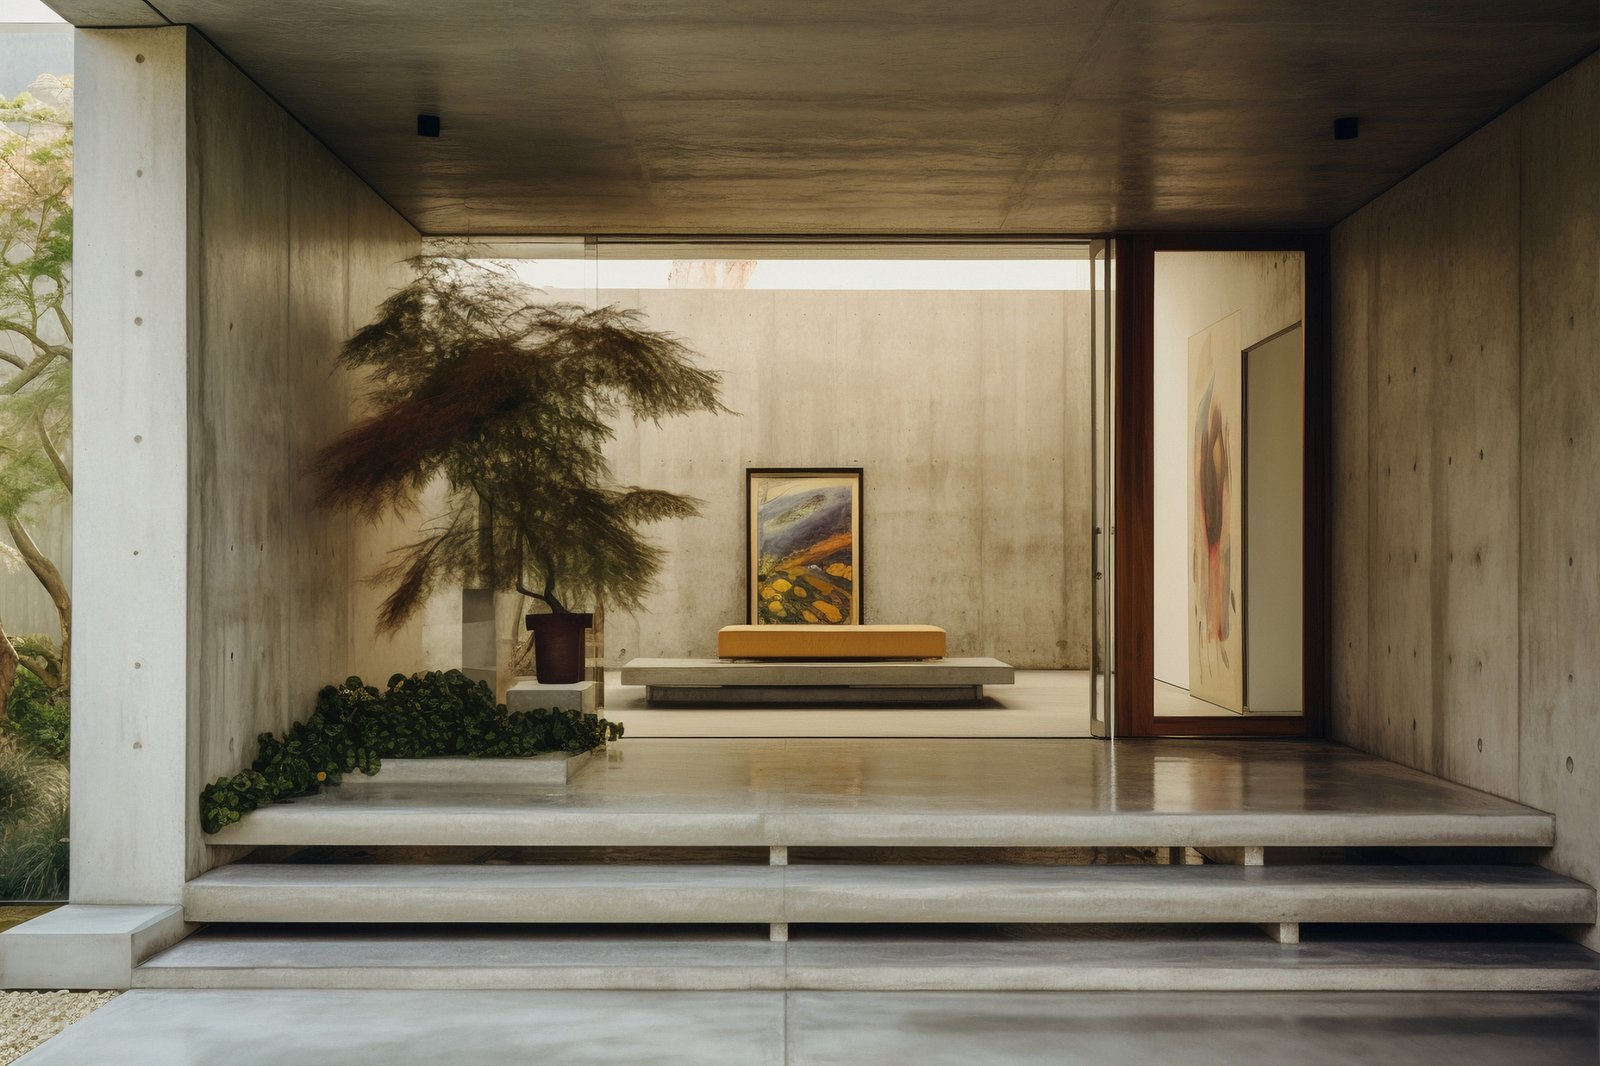 Brutalist entry way with concrete walls, floors and roof.